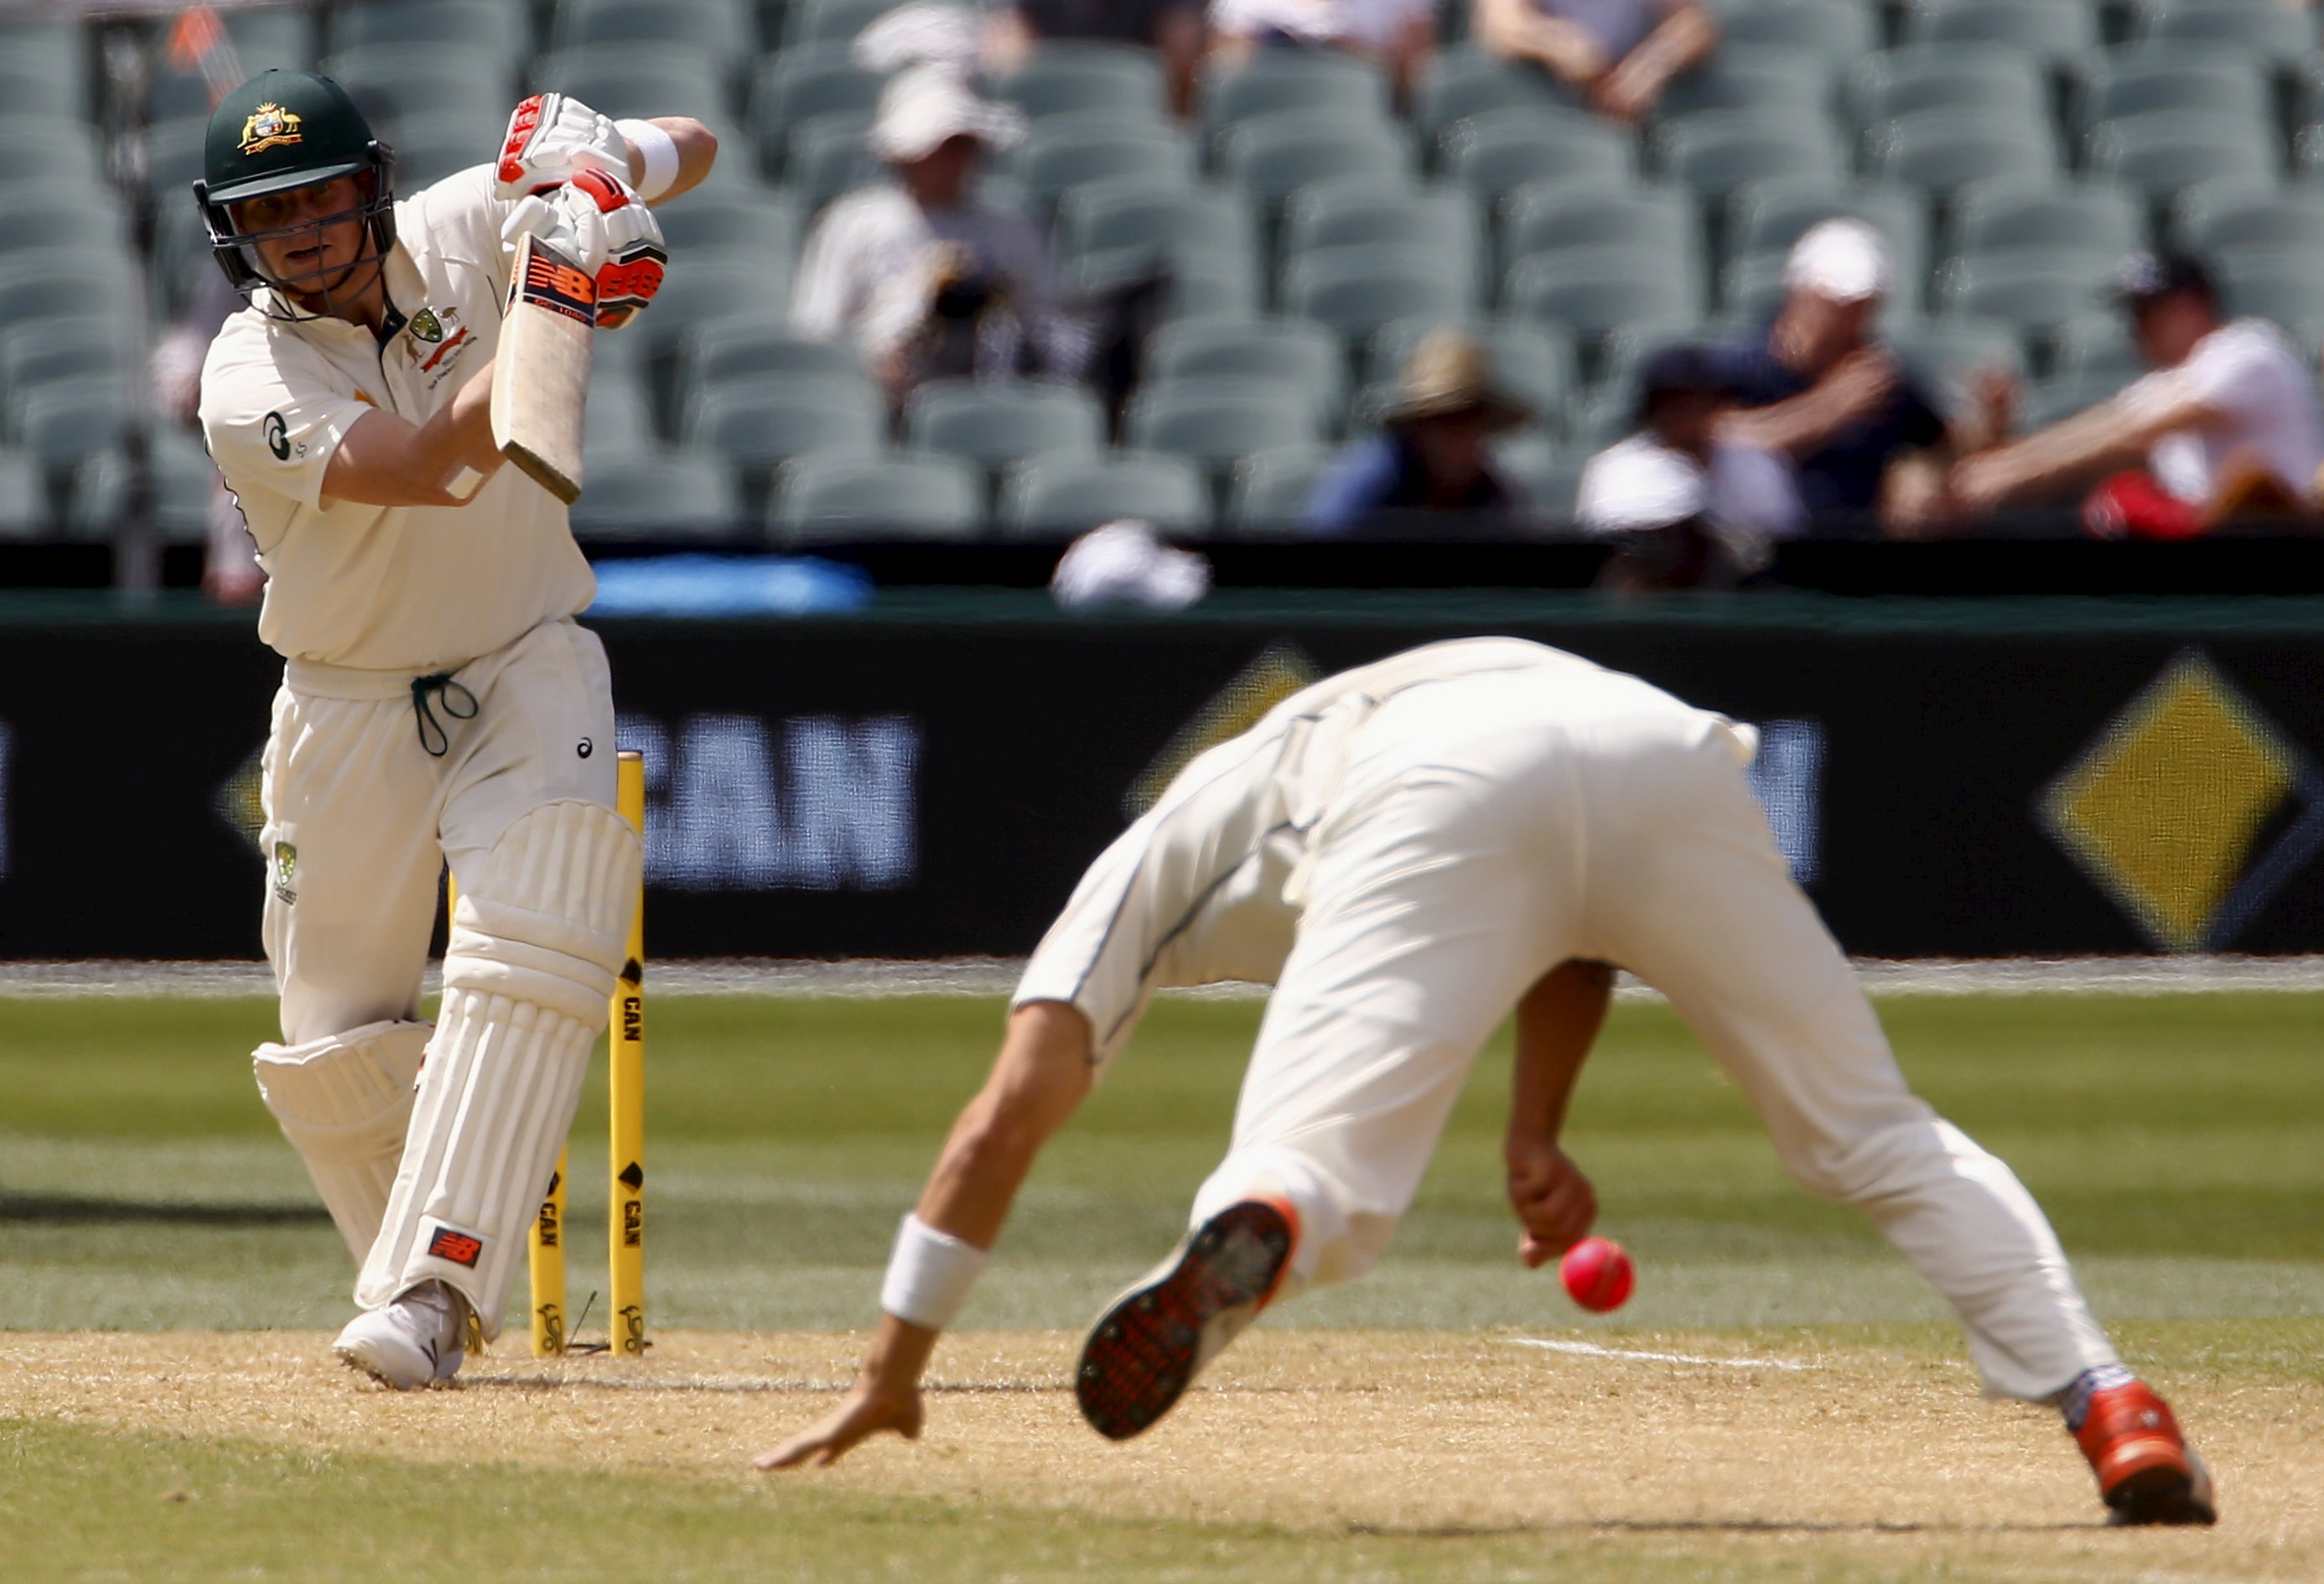 Australia's captain Steve Smith (left) watches as New Zealand's Doug Bracewell dives on the pitch to stop the ball during the second day of the third cricket test match at the Adelaide Oval, in South Australia, November 28, 2015. Photo: Reuters